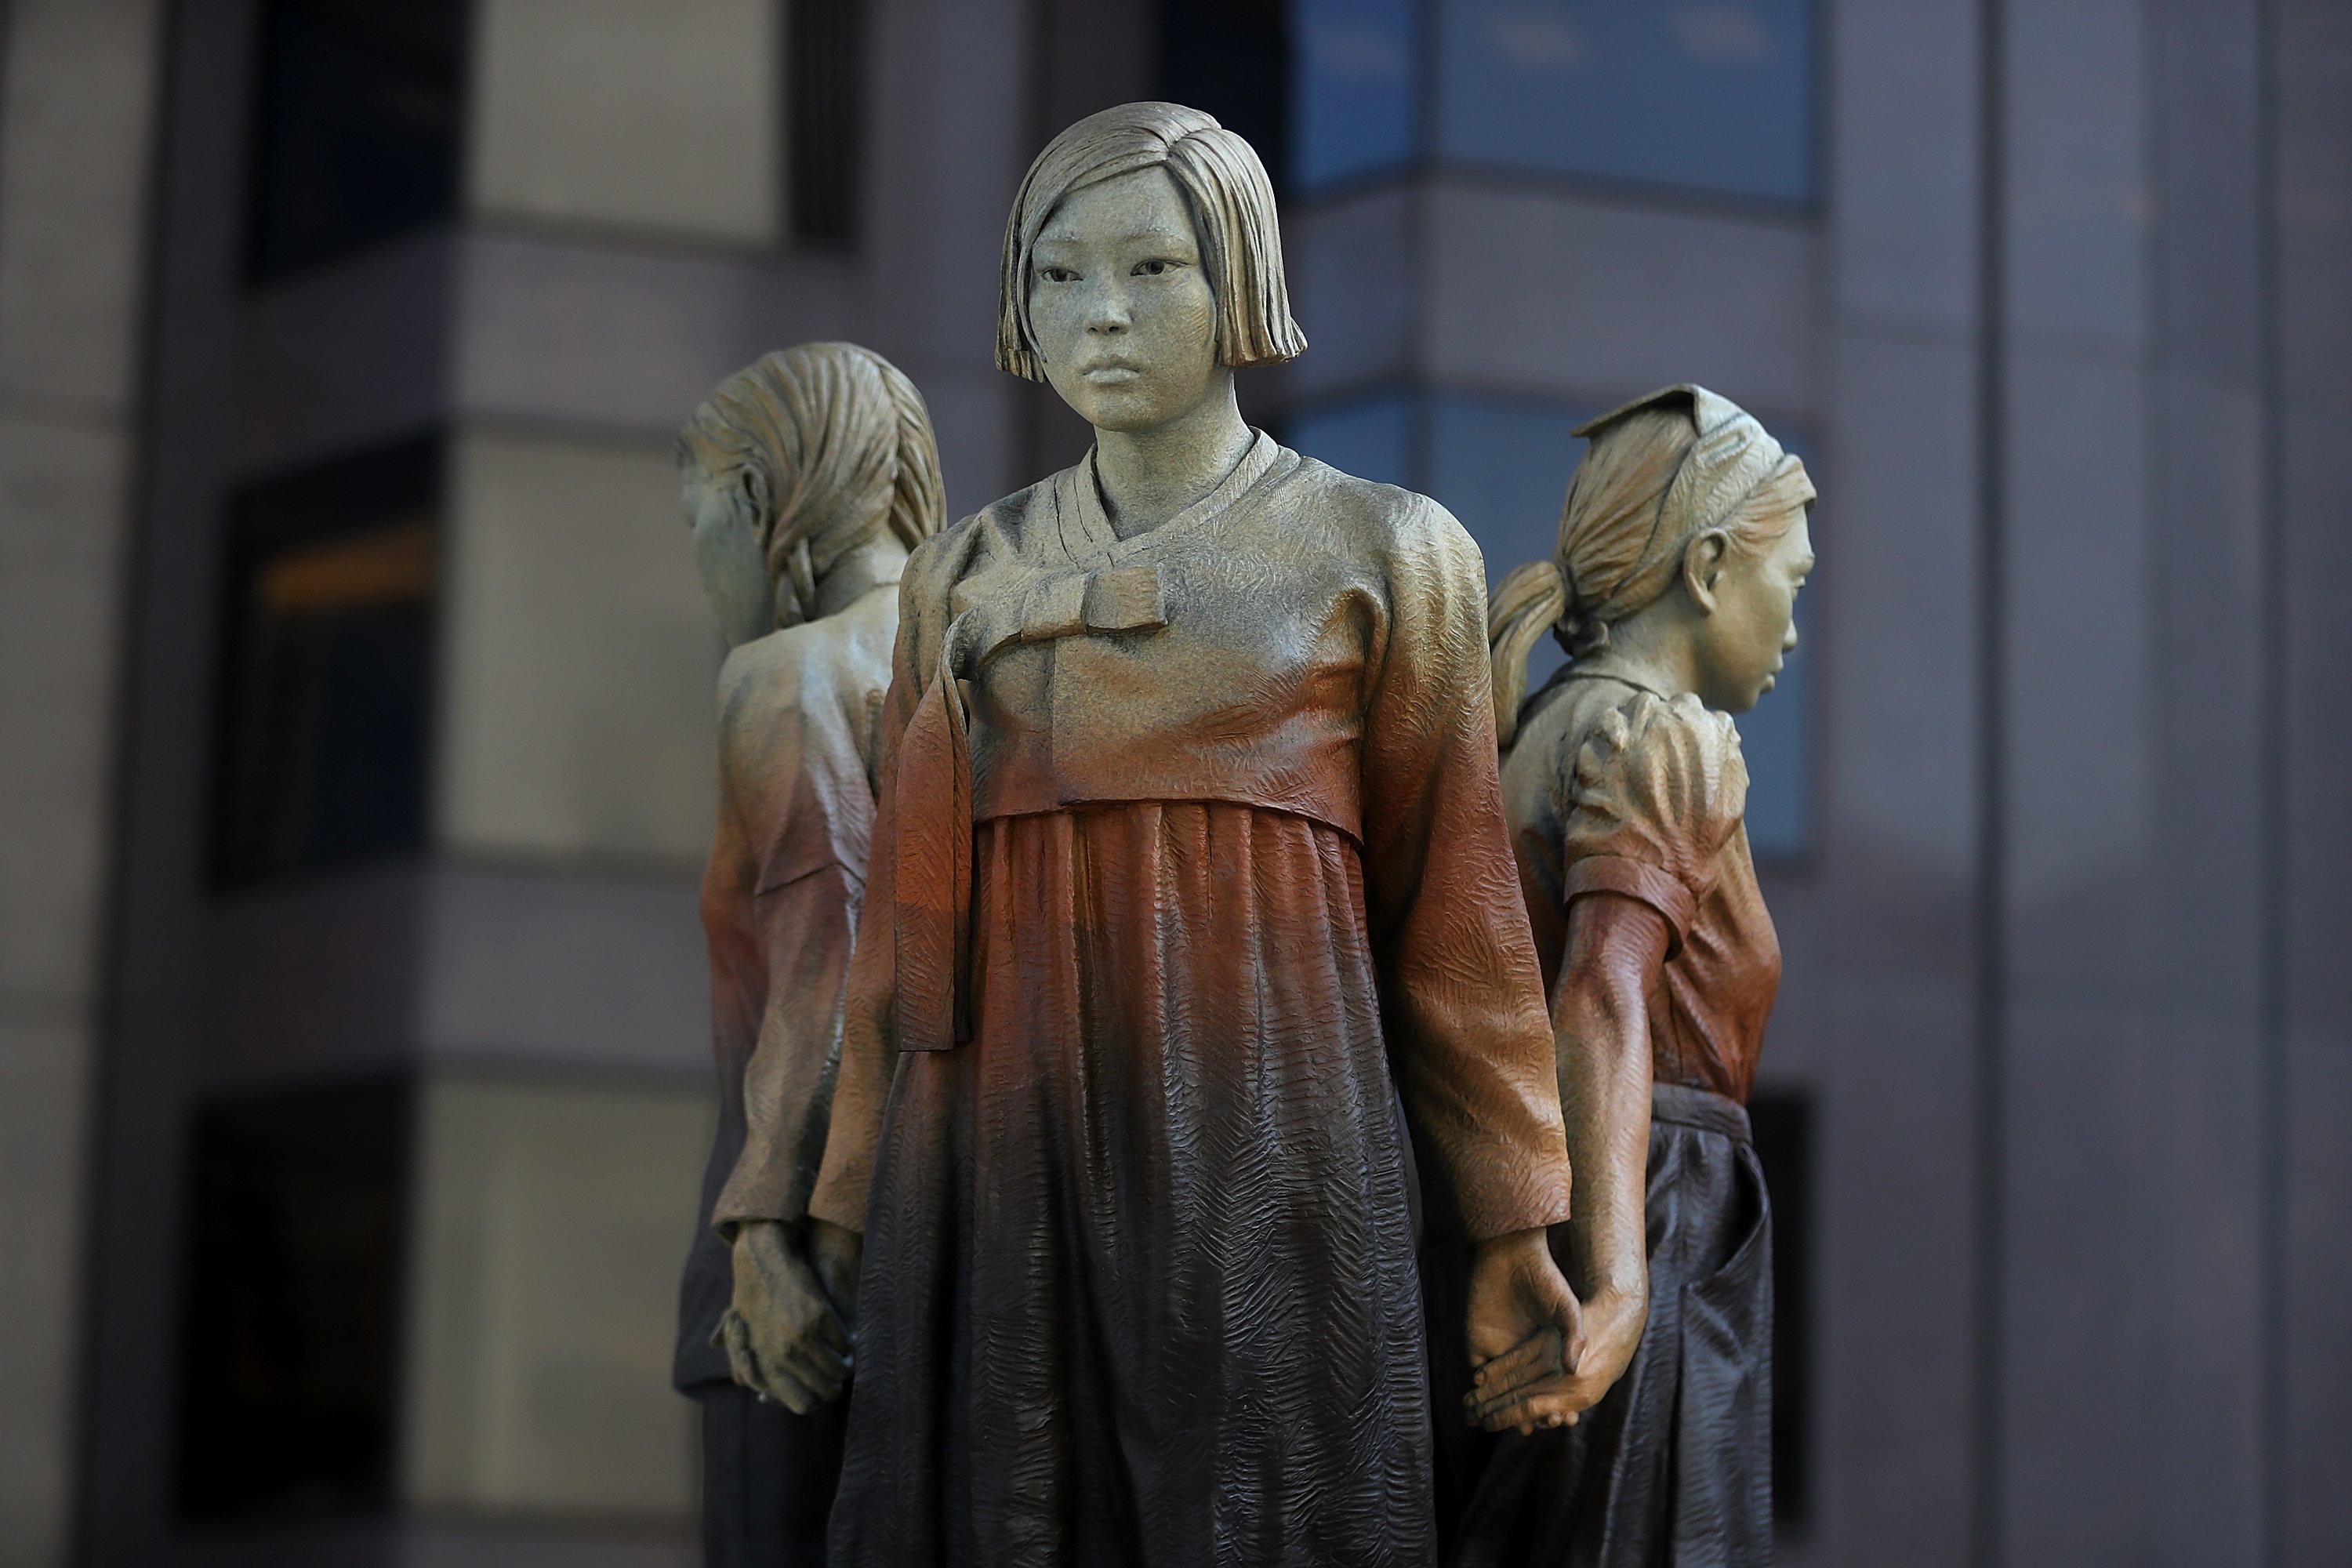 Philadelphia Art Commission approves 'comfort women' statue to honor Korean  women victimized during WWII